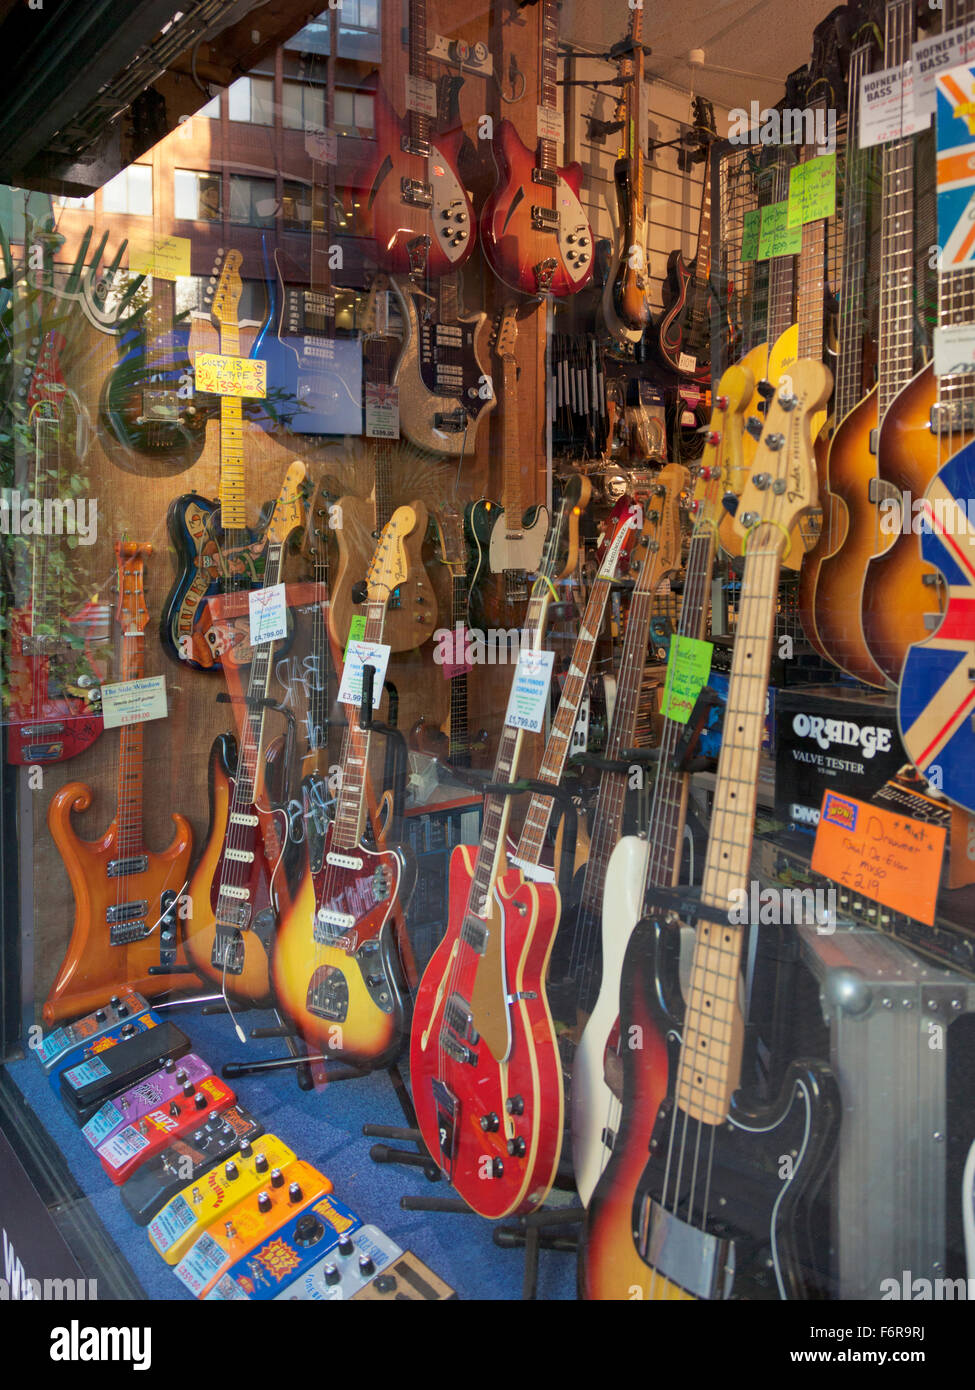 Macari's Musical Instruments - Guitar shop on Charing Cross Road Stock  Photo - Alamy